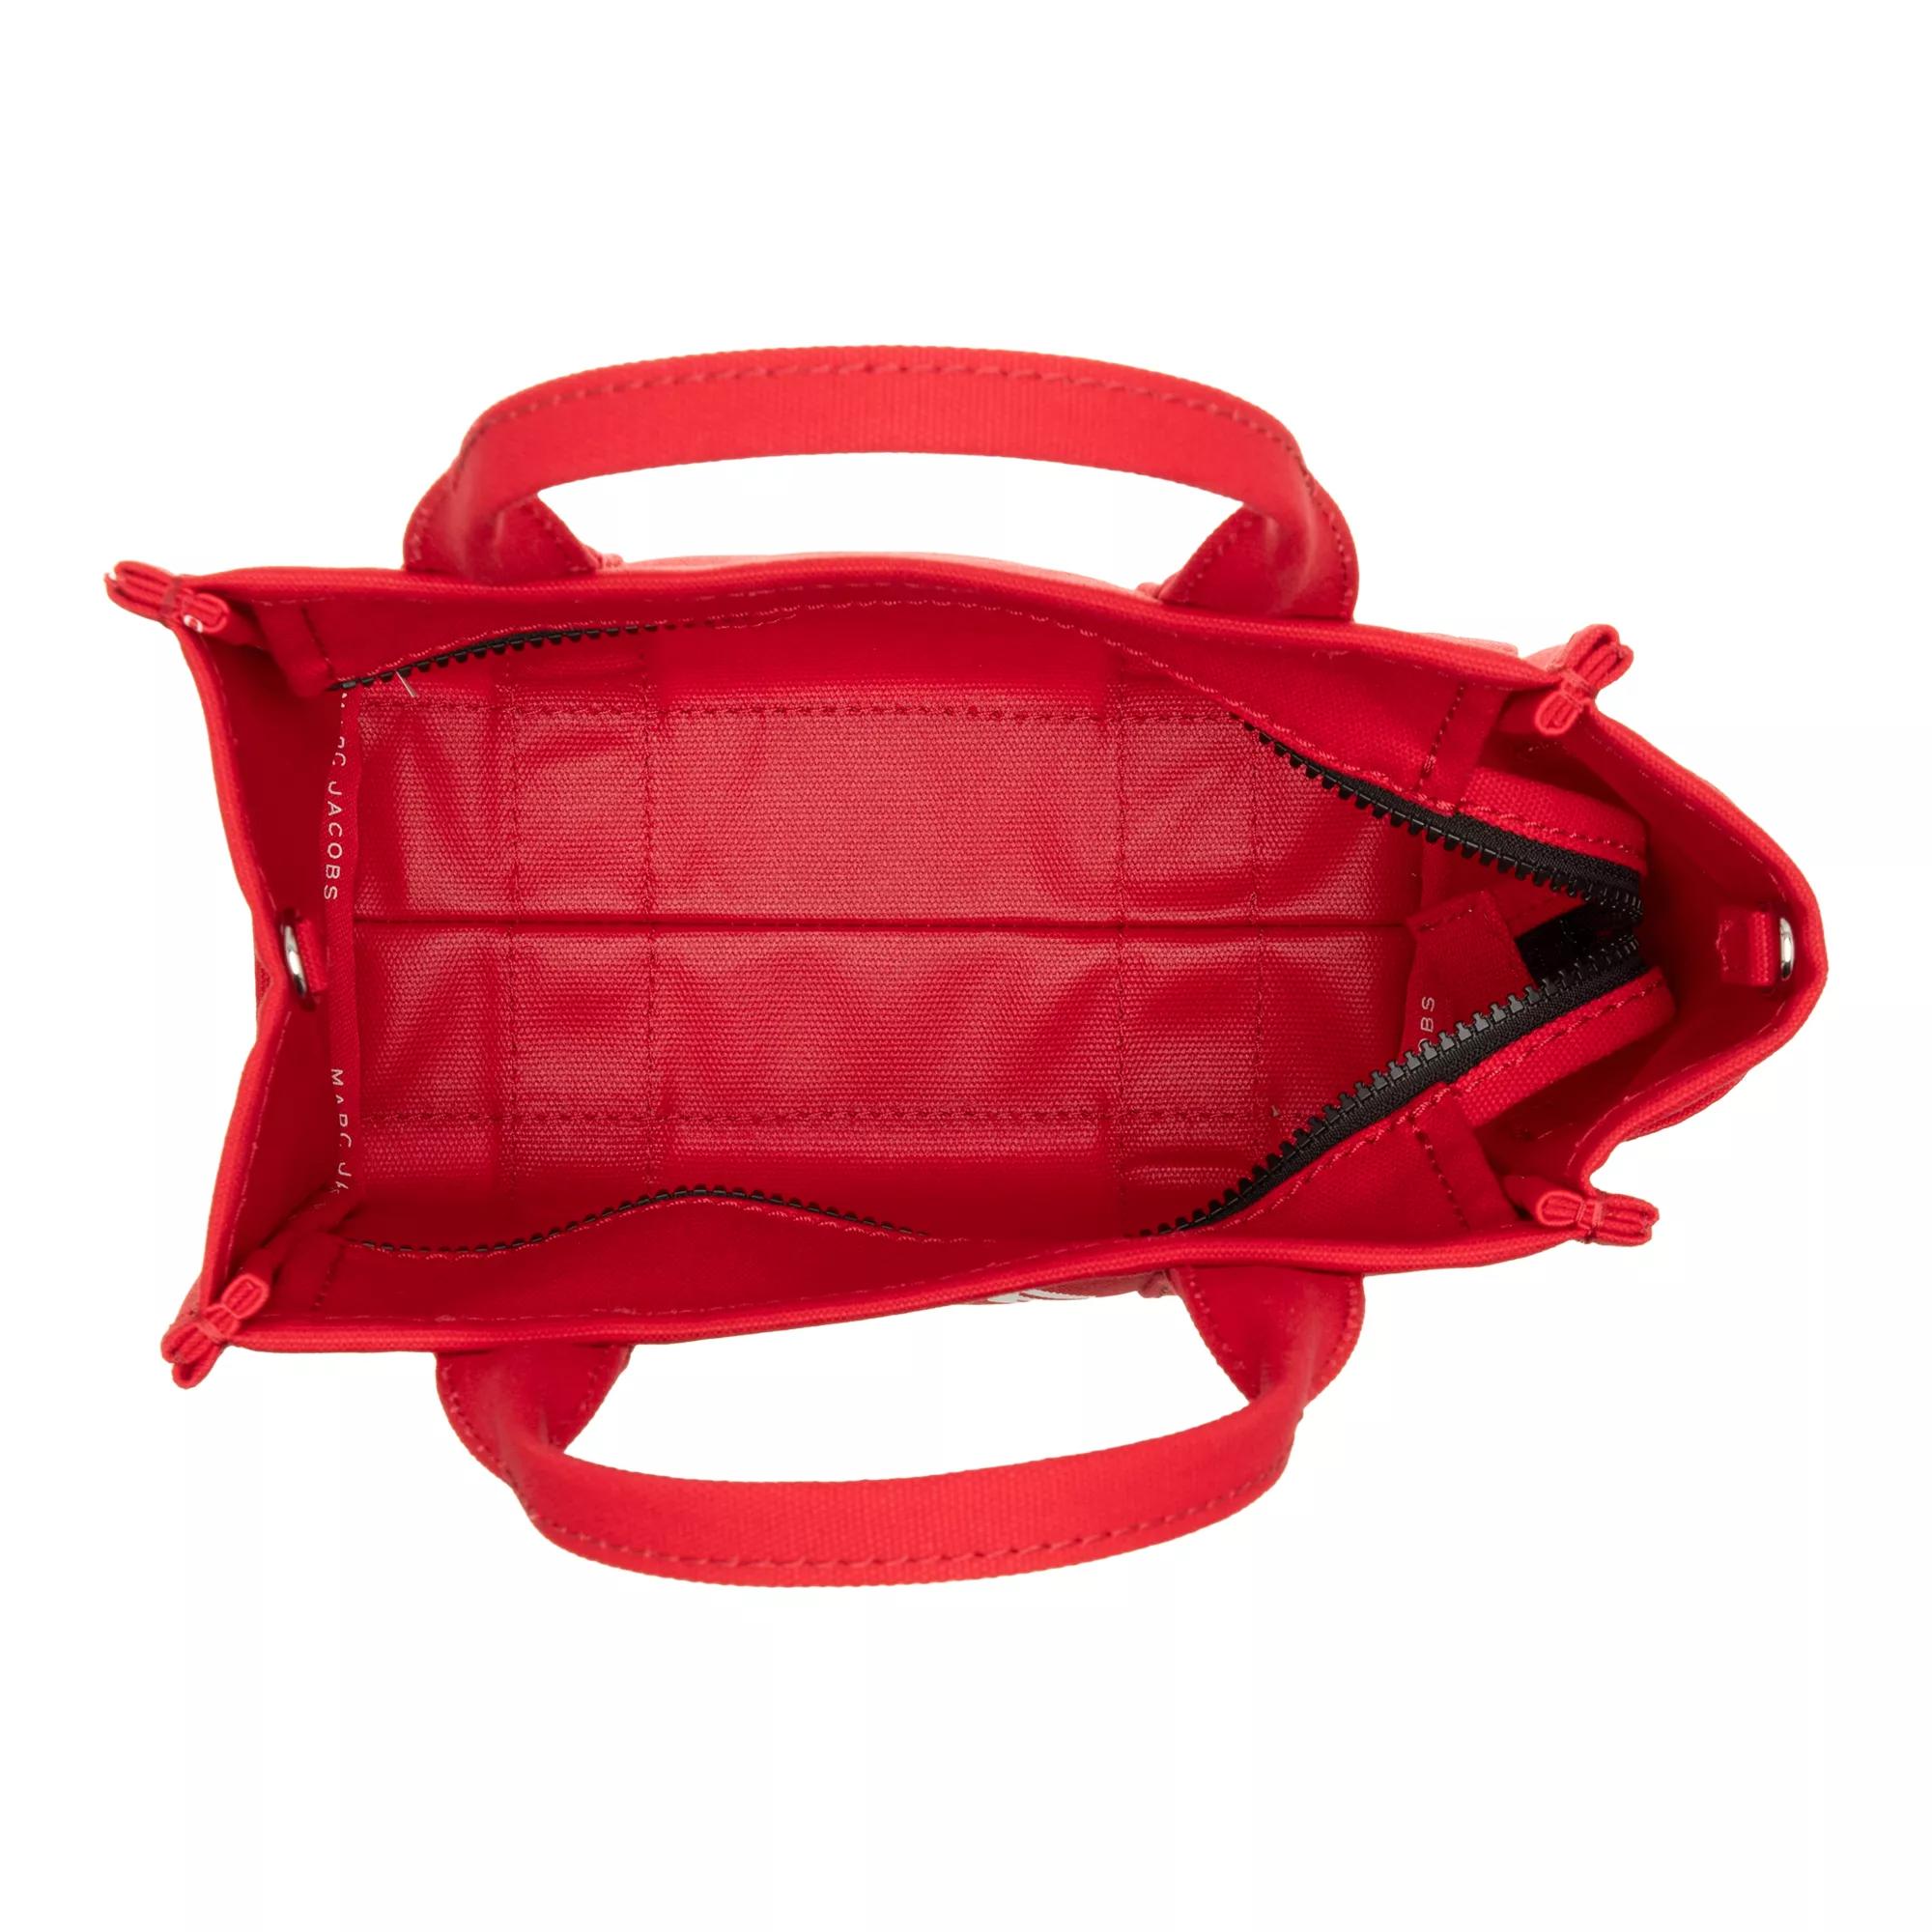 Marc Jacobs Totes The Small Tote Bag in rood